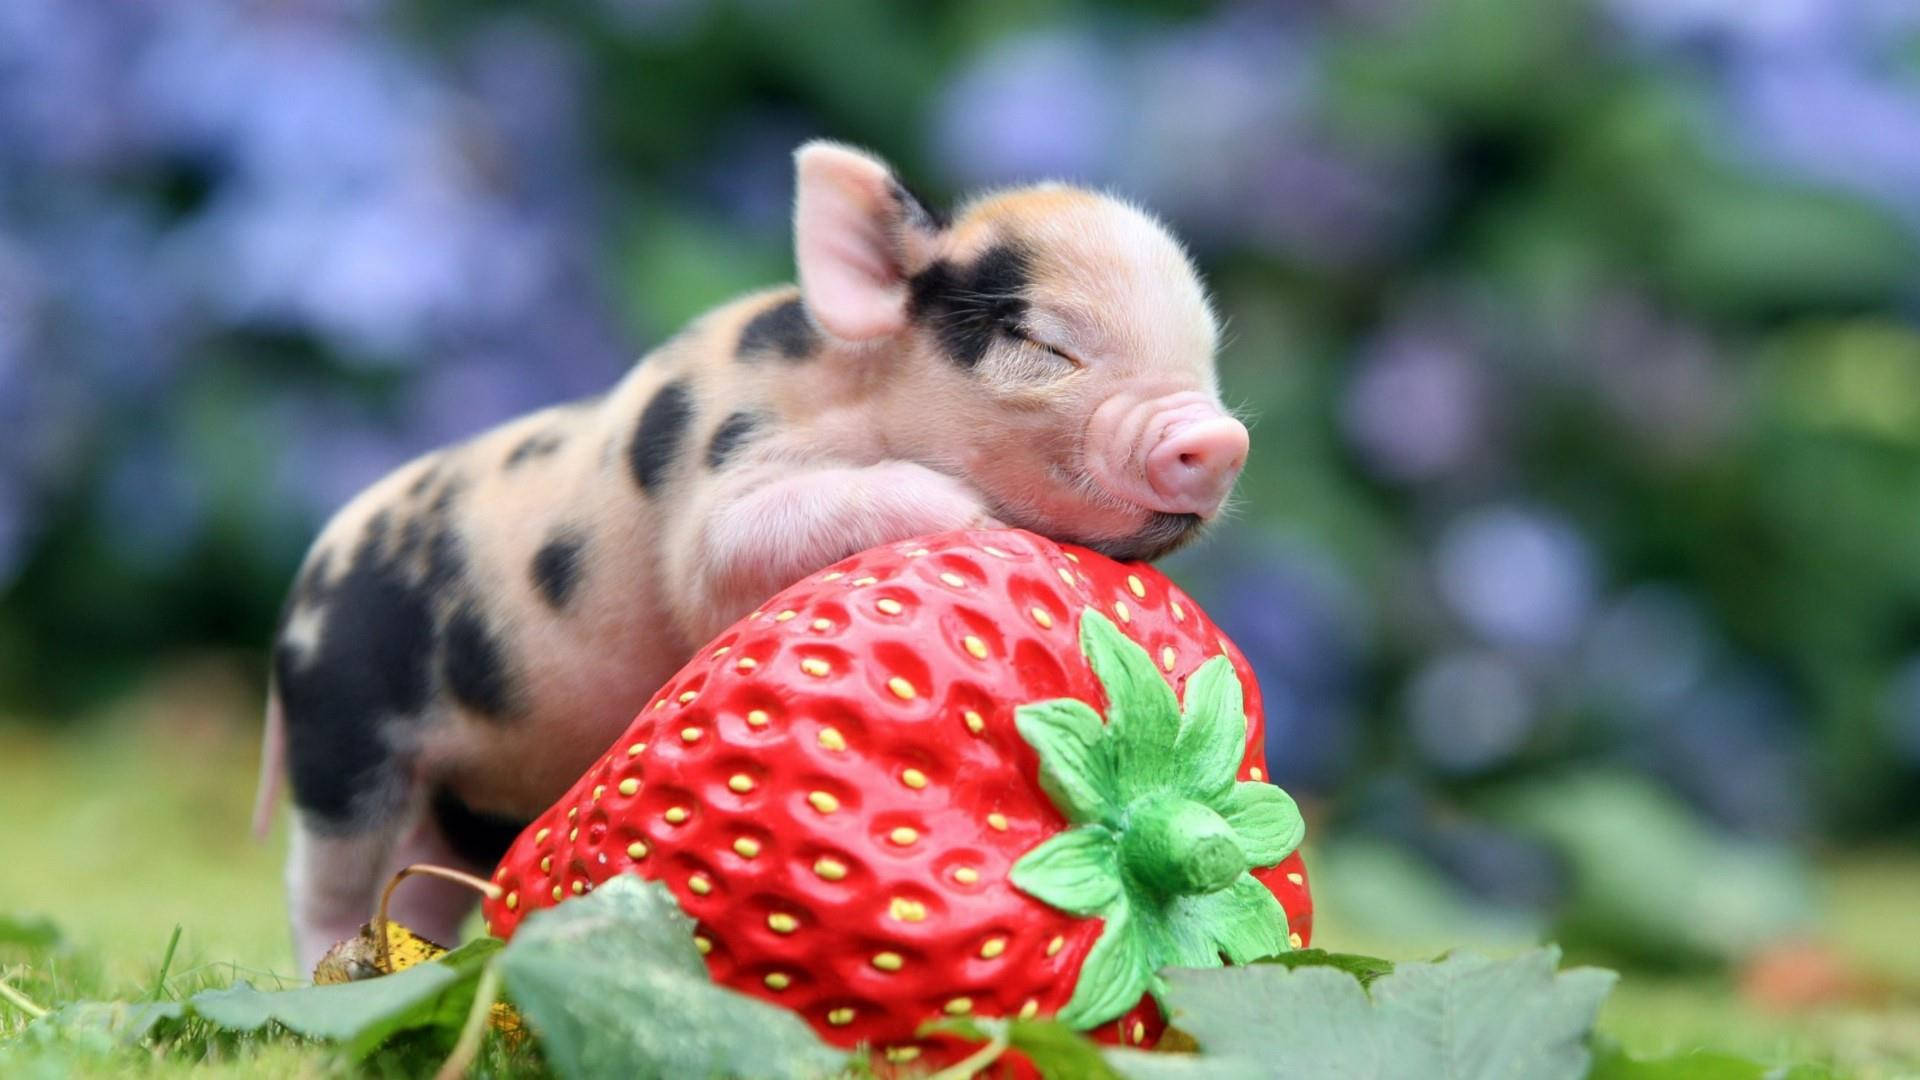 Adorable Piglet Resting In A Field Wallpaper